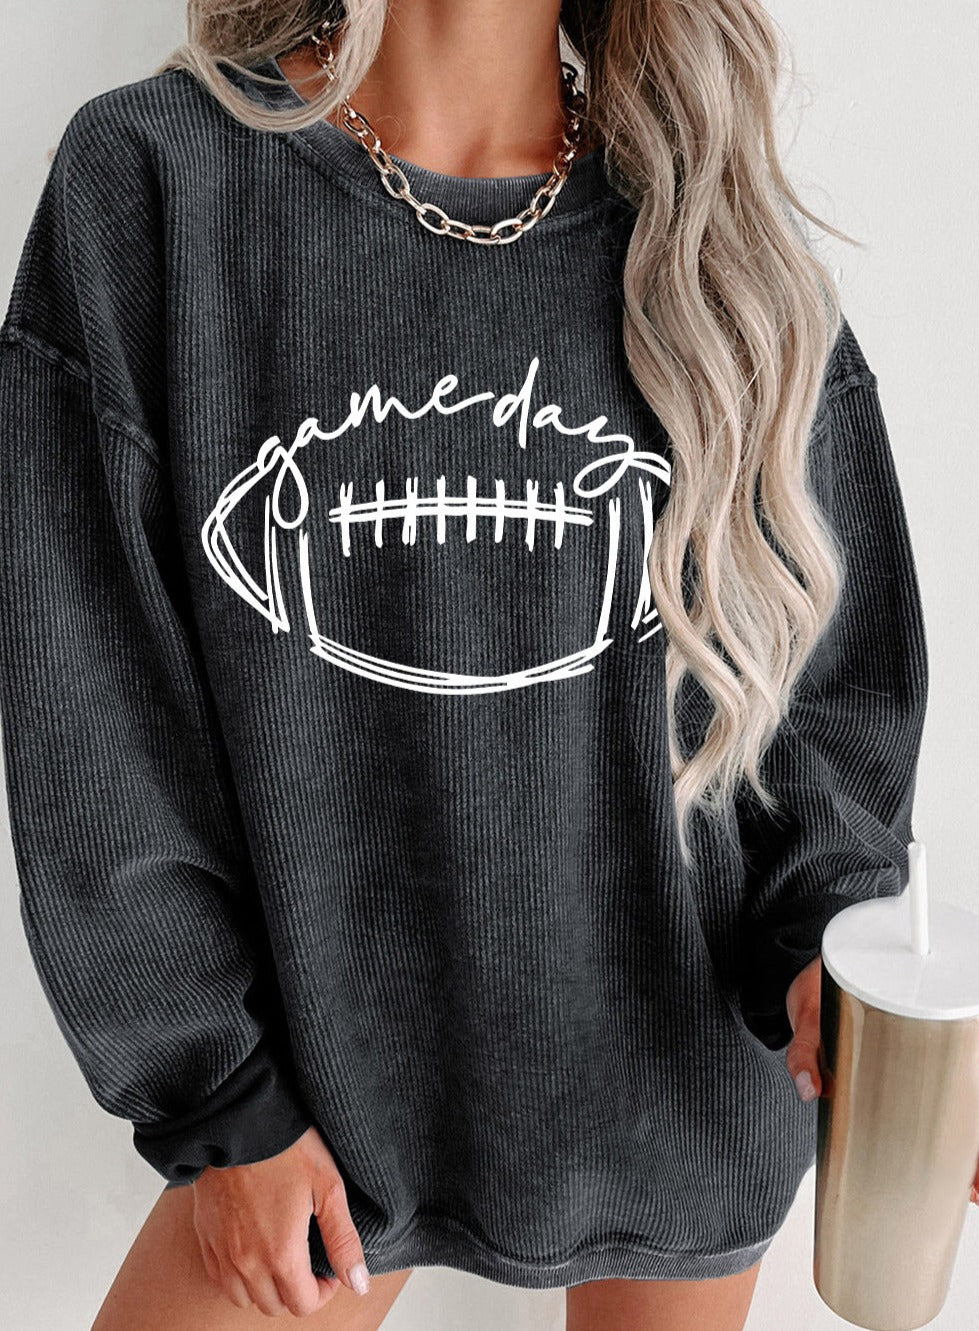 Gameday Football Graphic Sweatshirt - Cheeky Chic Boutique